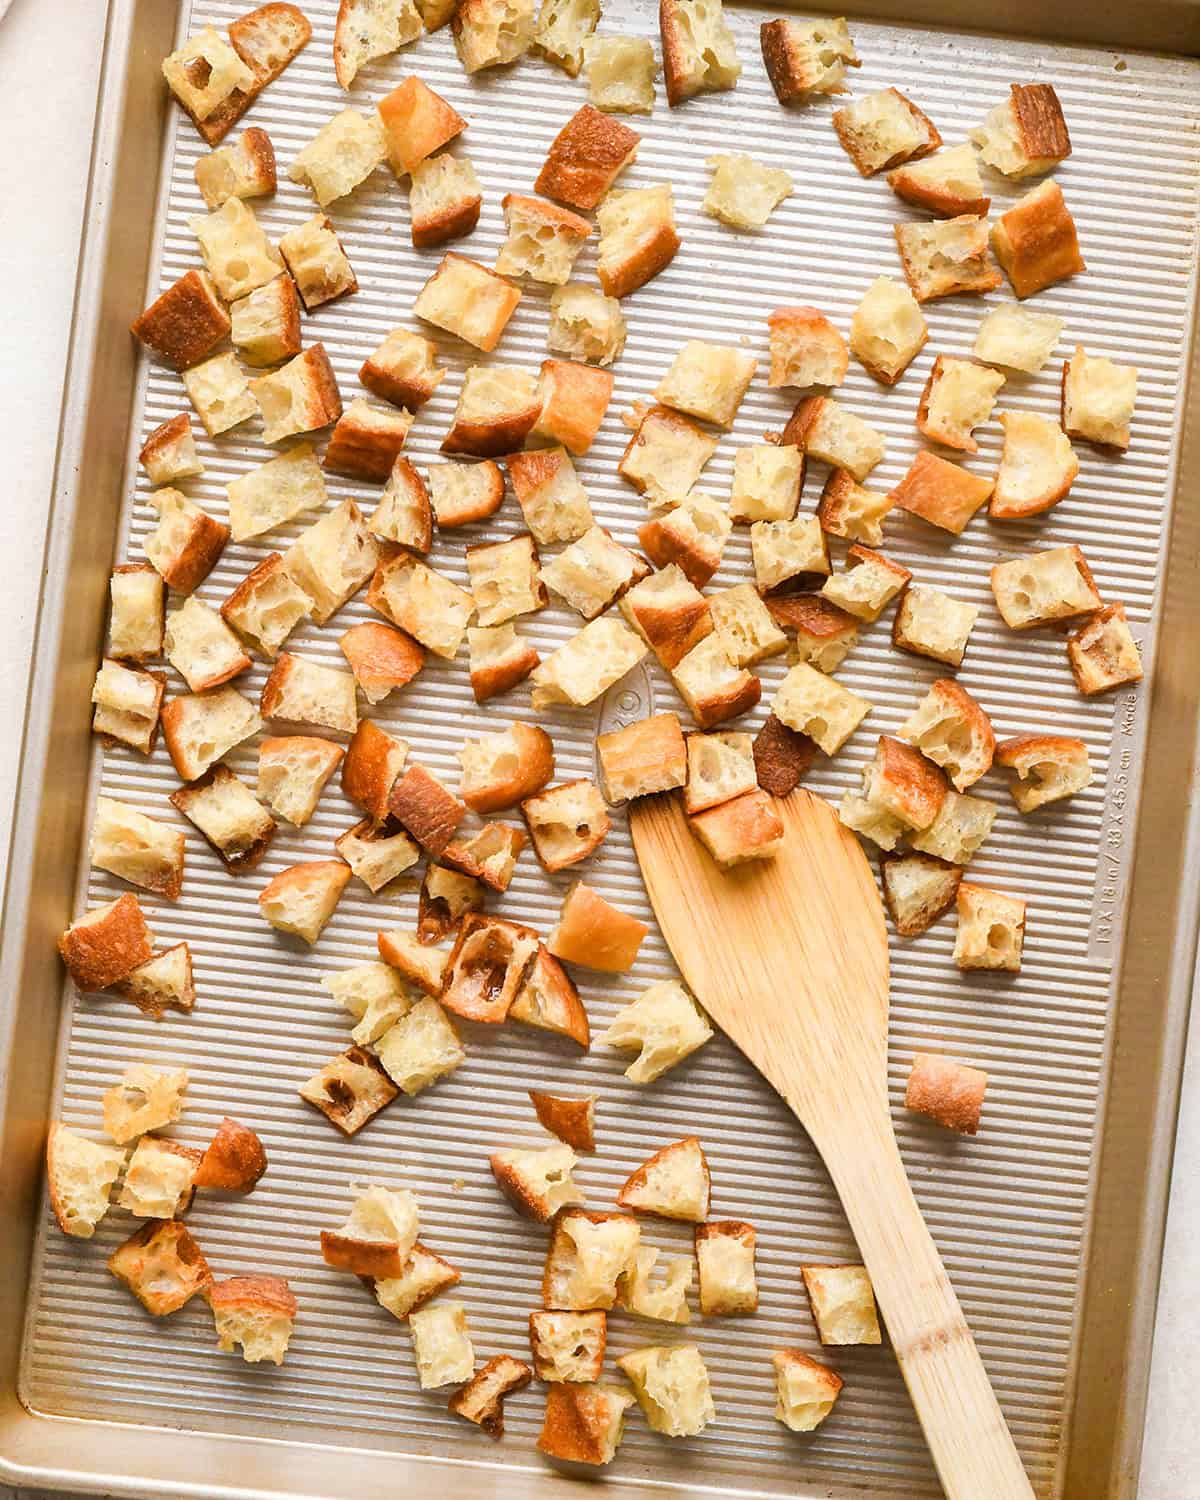 croutons on a baking sheet after baking